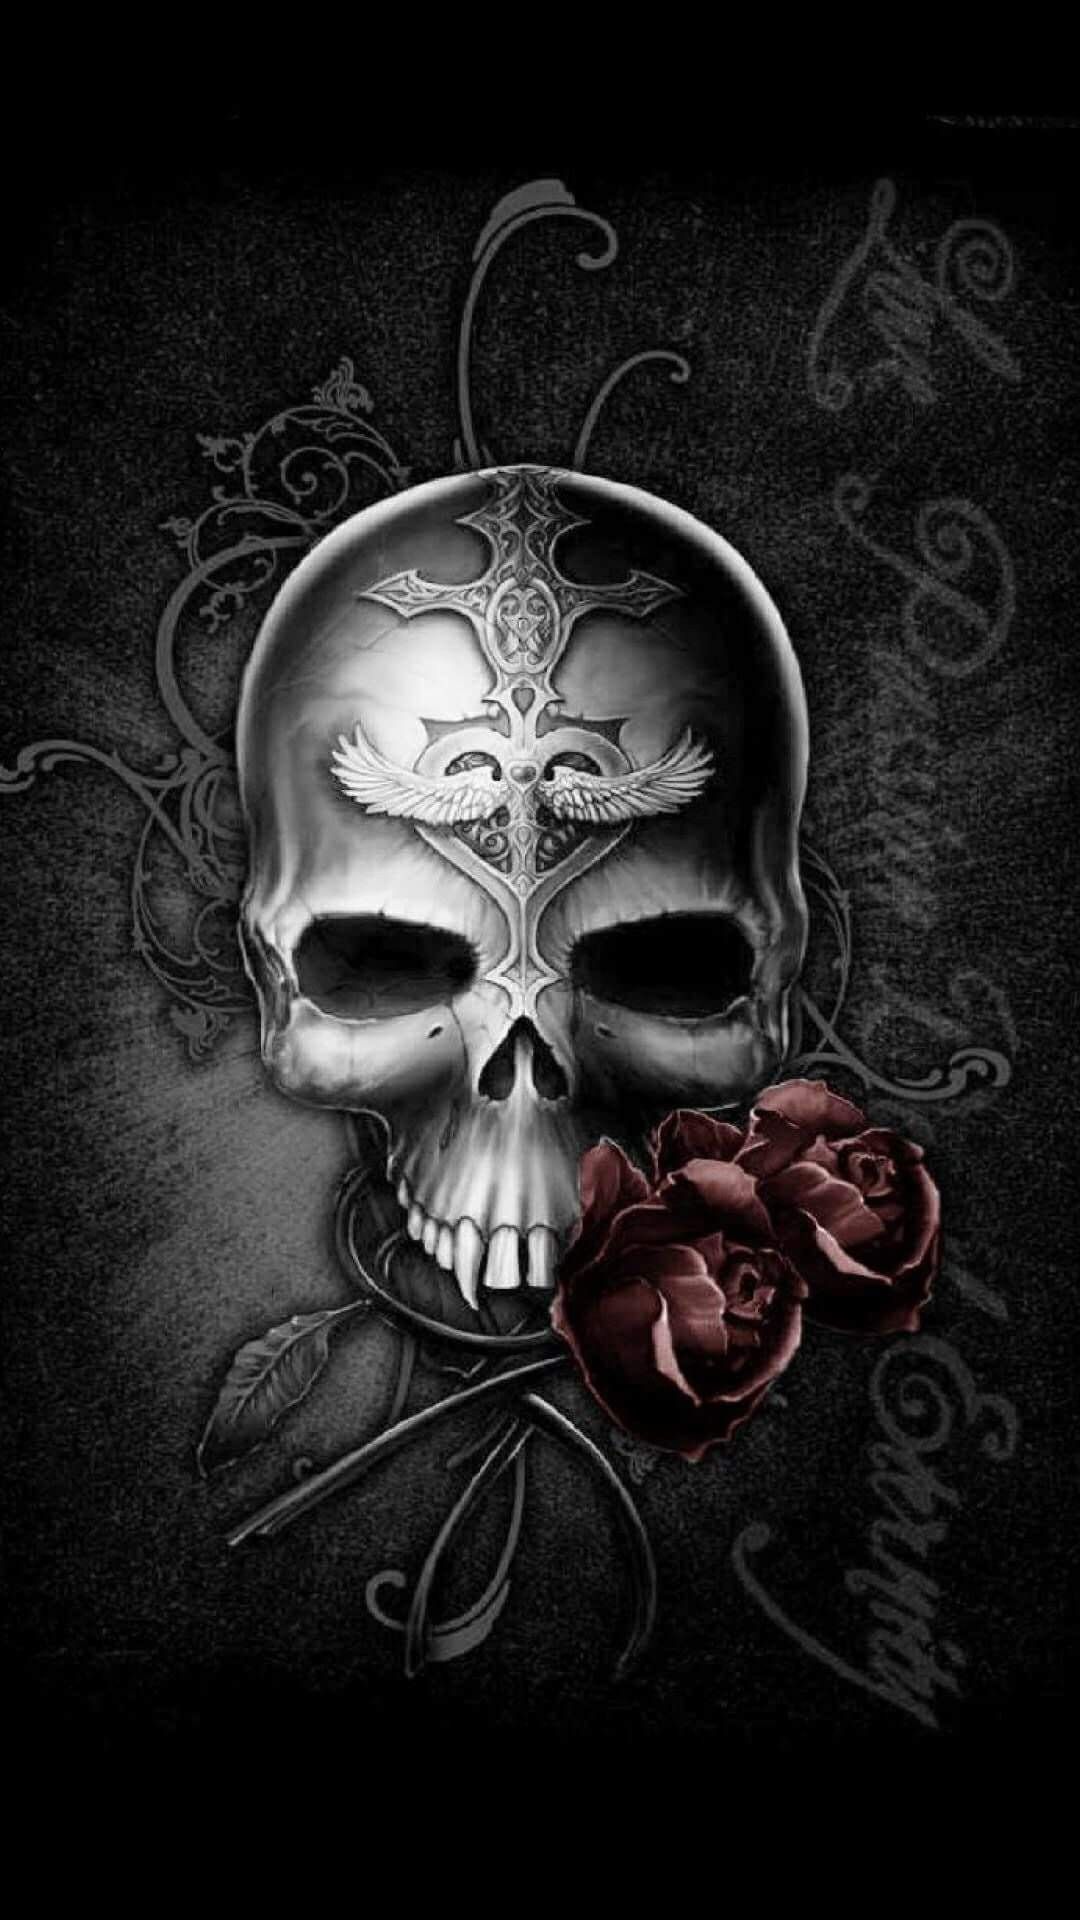 Pin by zombee ghoul on skulls grim reapers etc skull wallpaper skull pictures skulls drawing